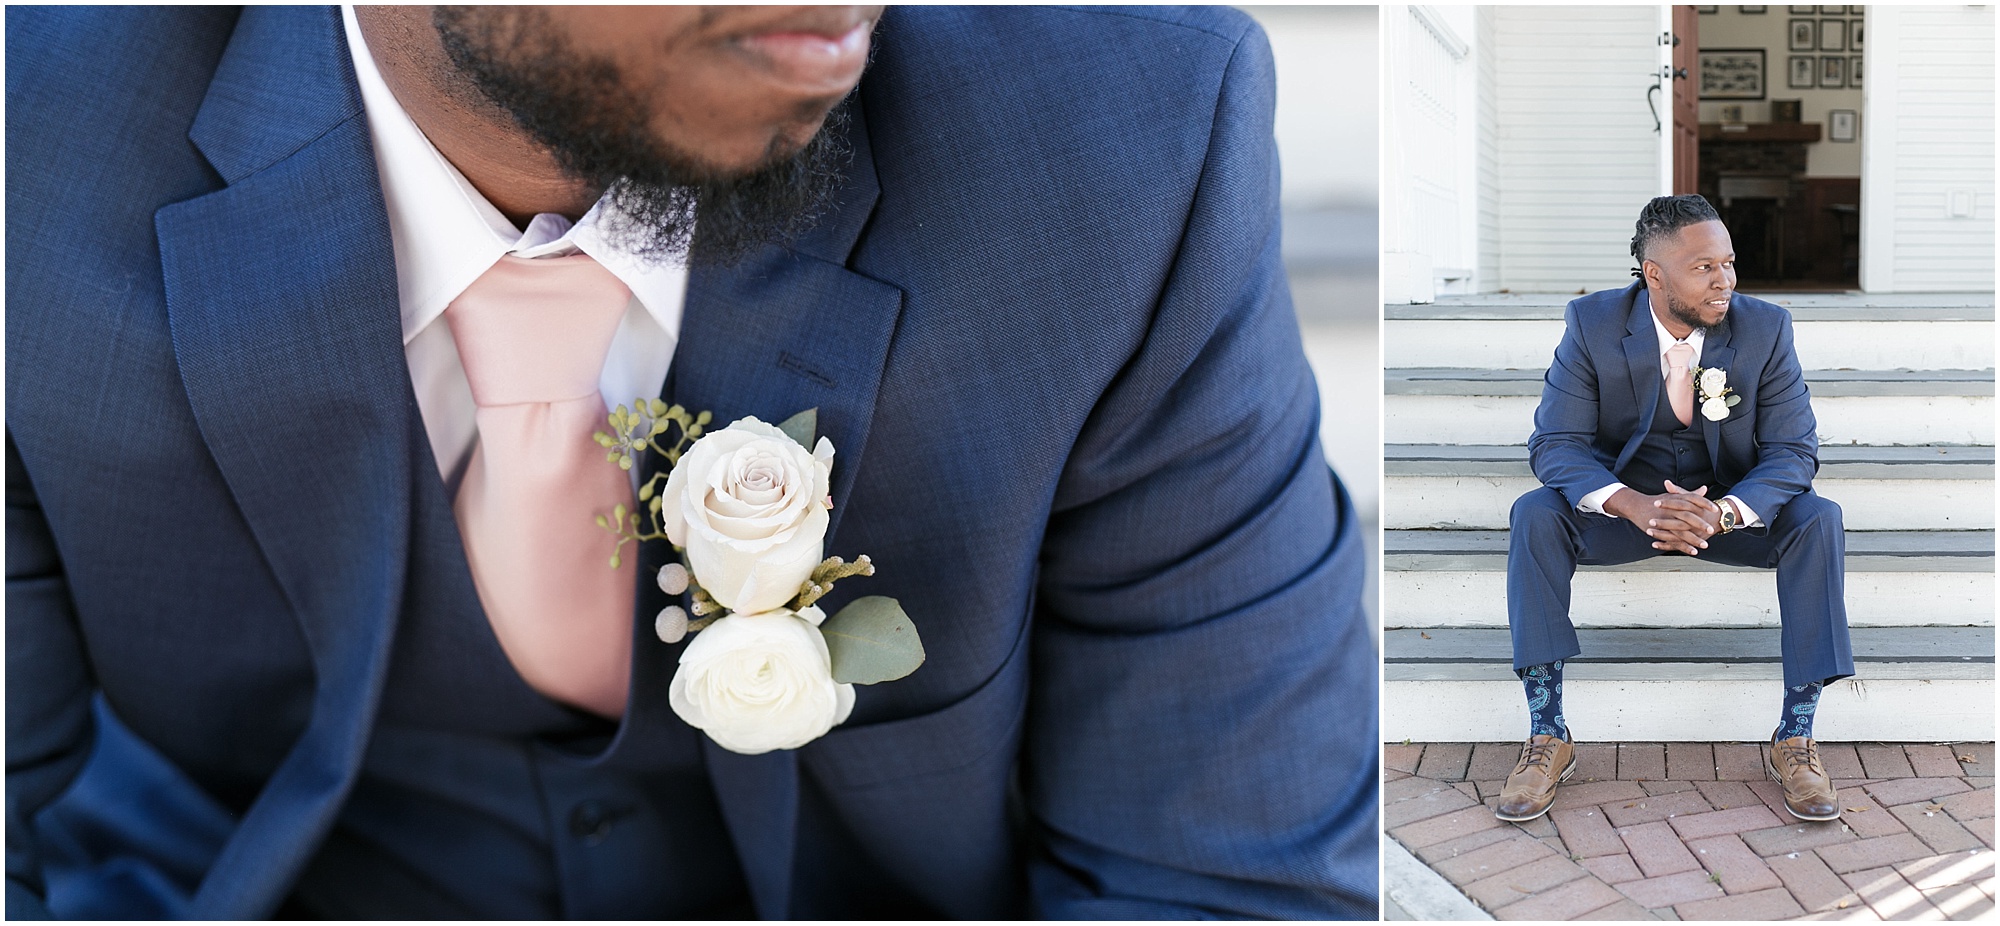 Close up of the grooms boutonniere while he's sitting on the steps.